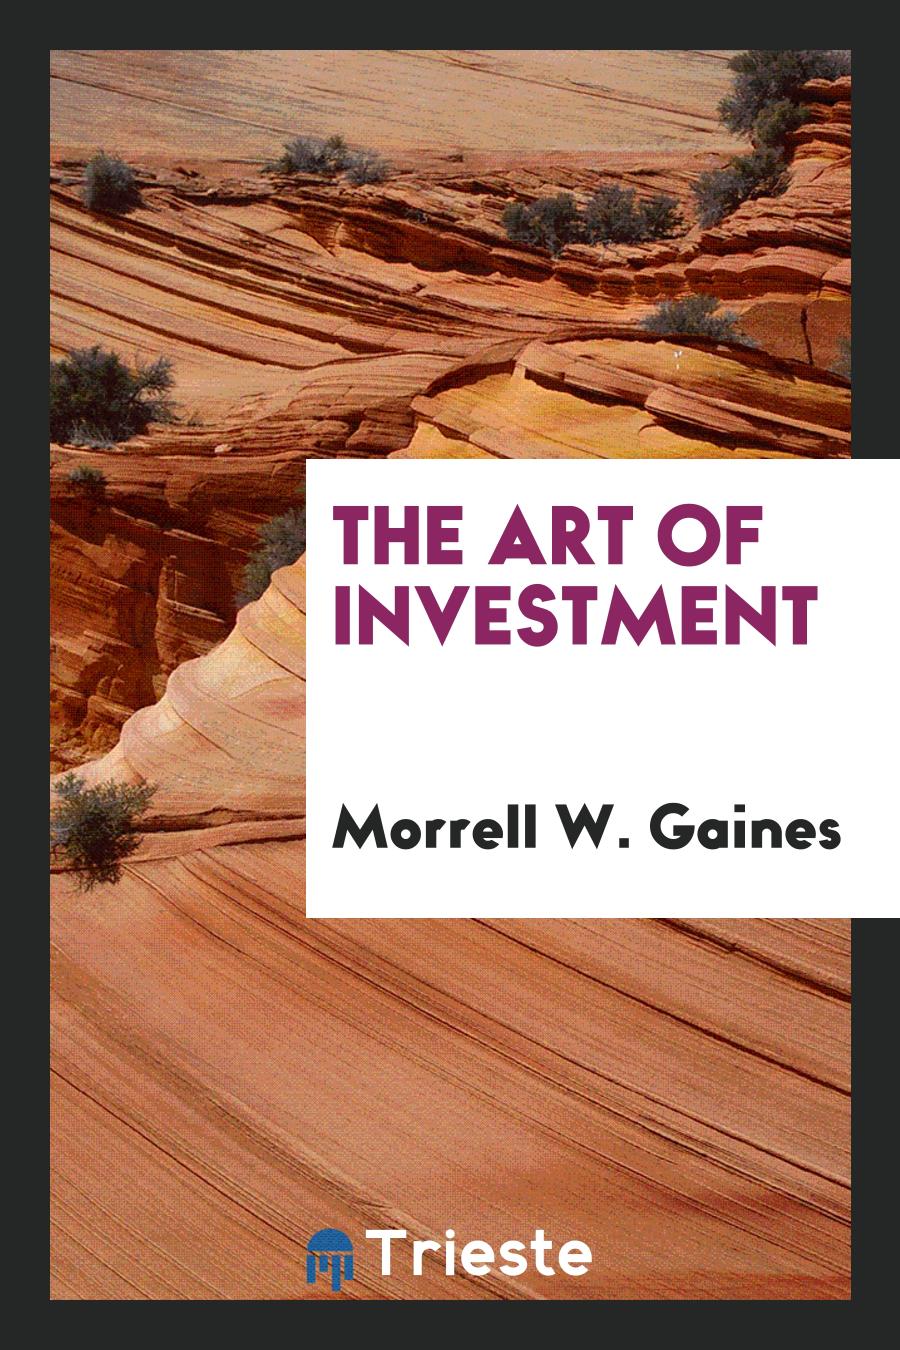 The Art of Investment